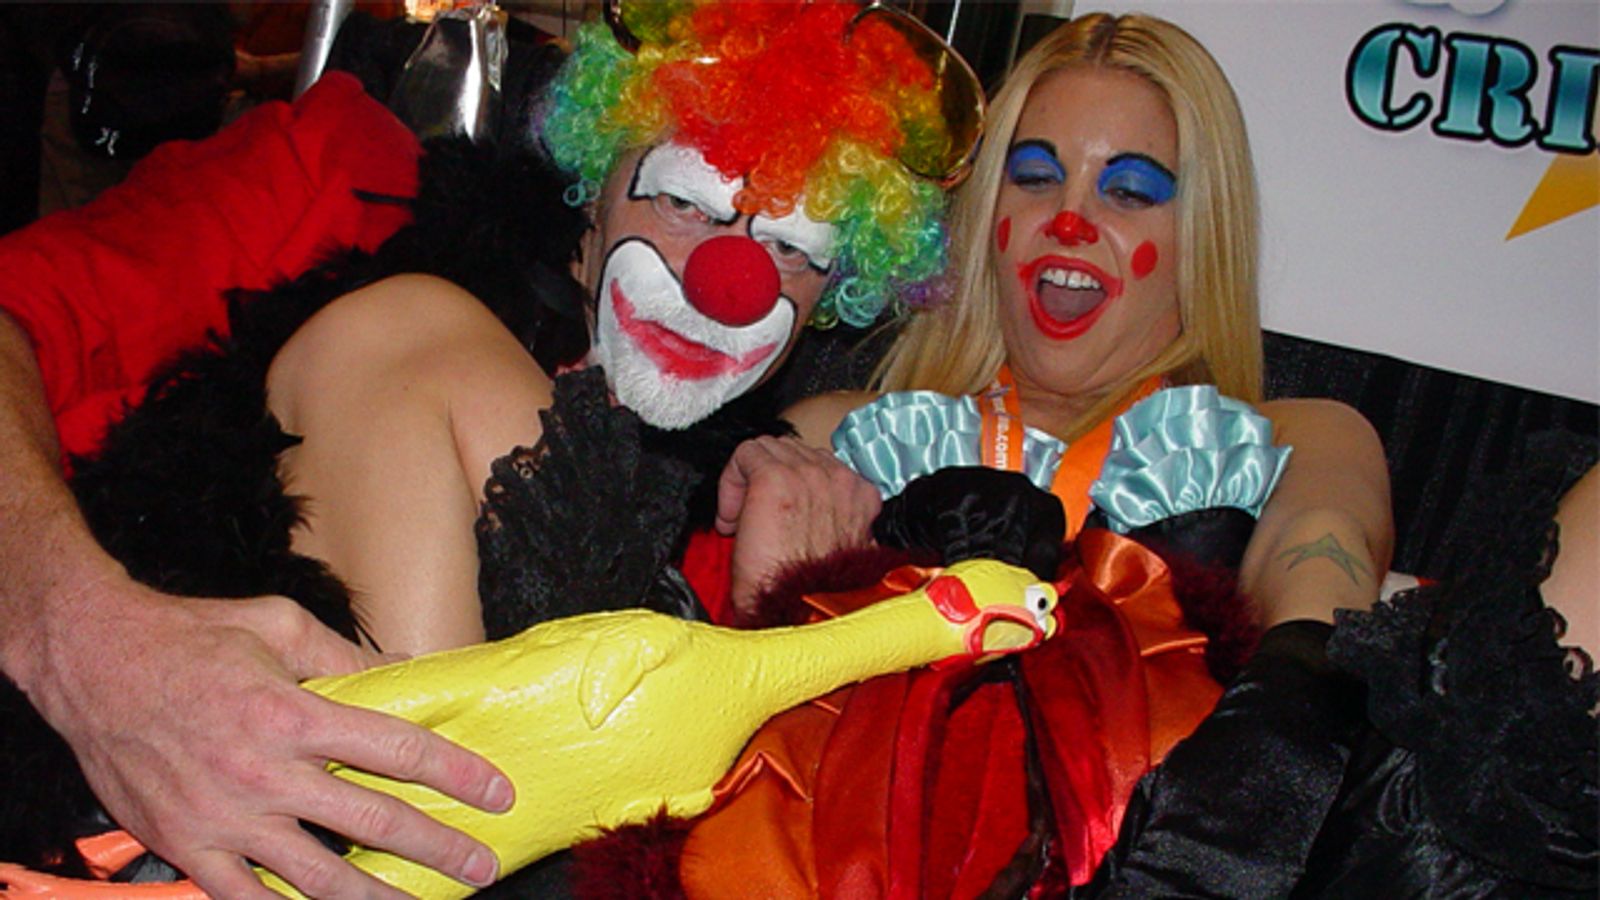 Dick Chibbles Revisits Clown Porn as Tribute to Hollie Stevens